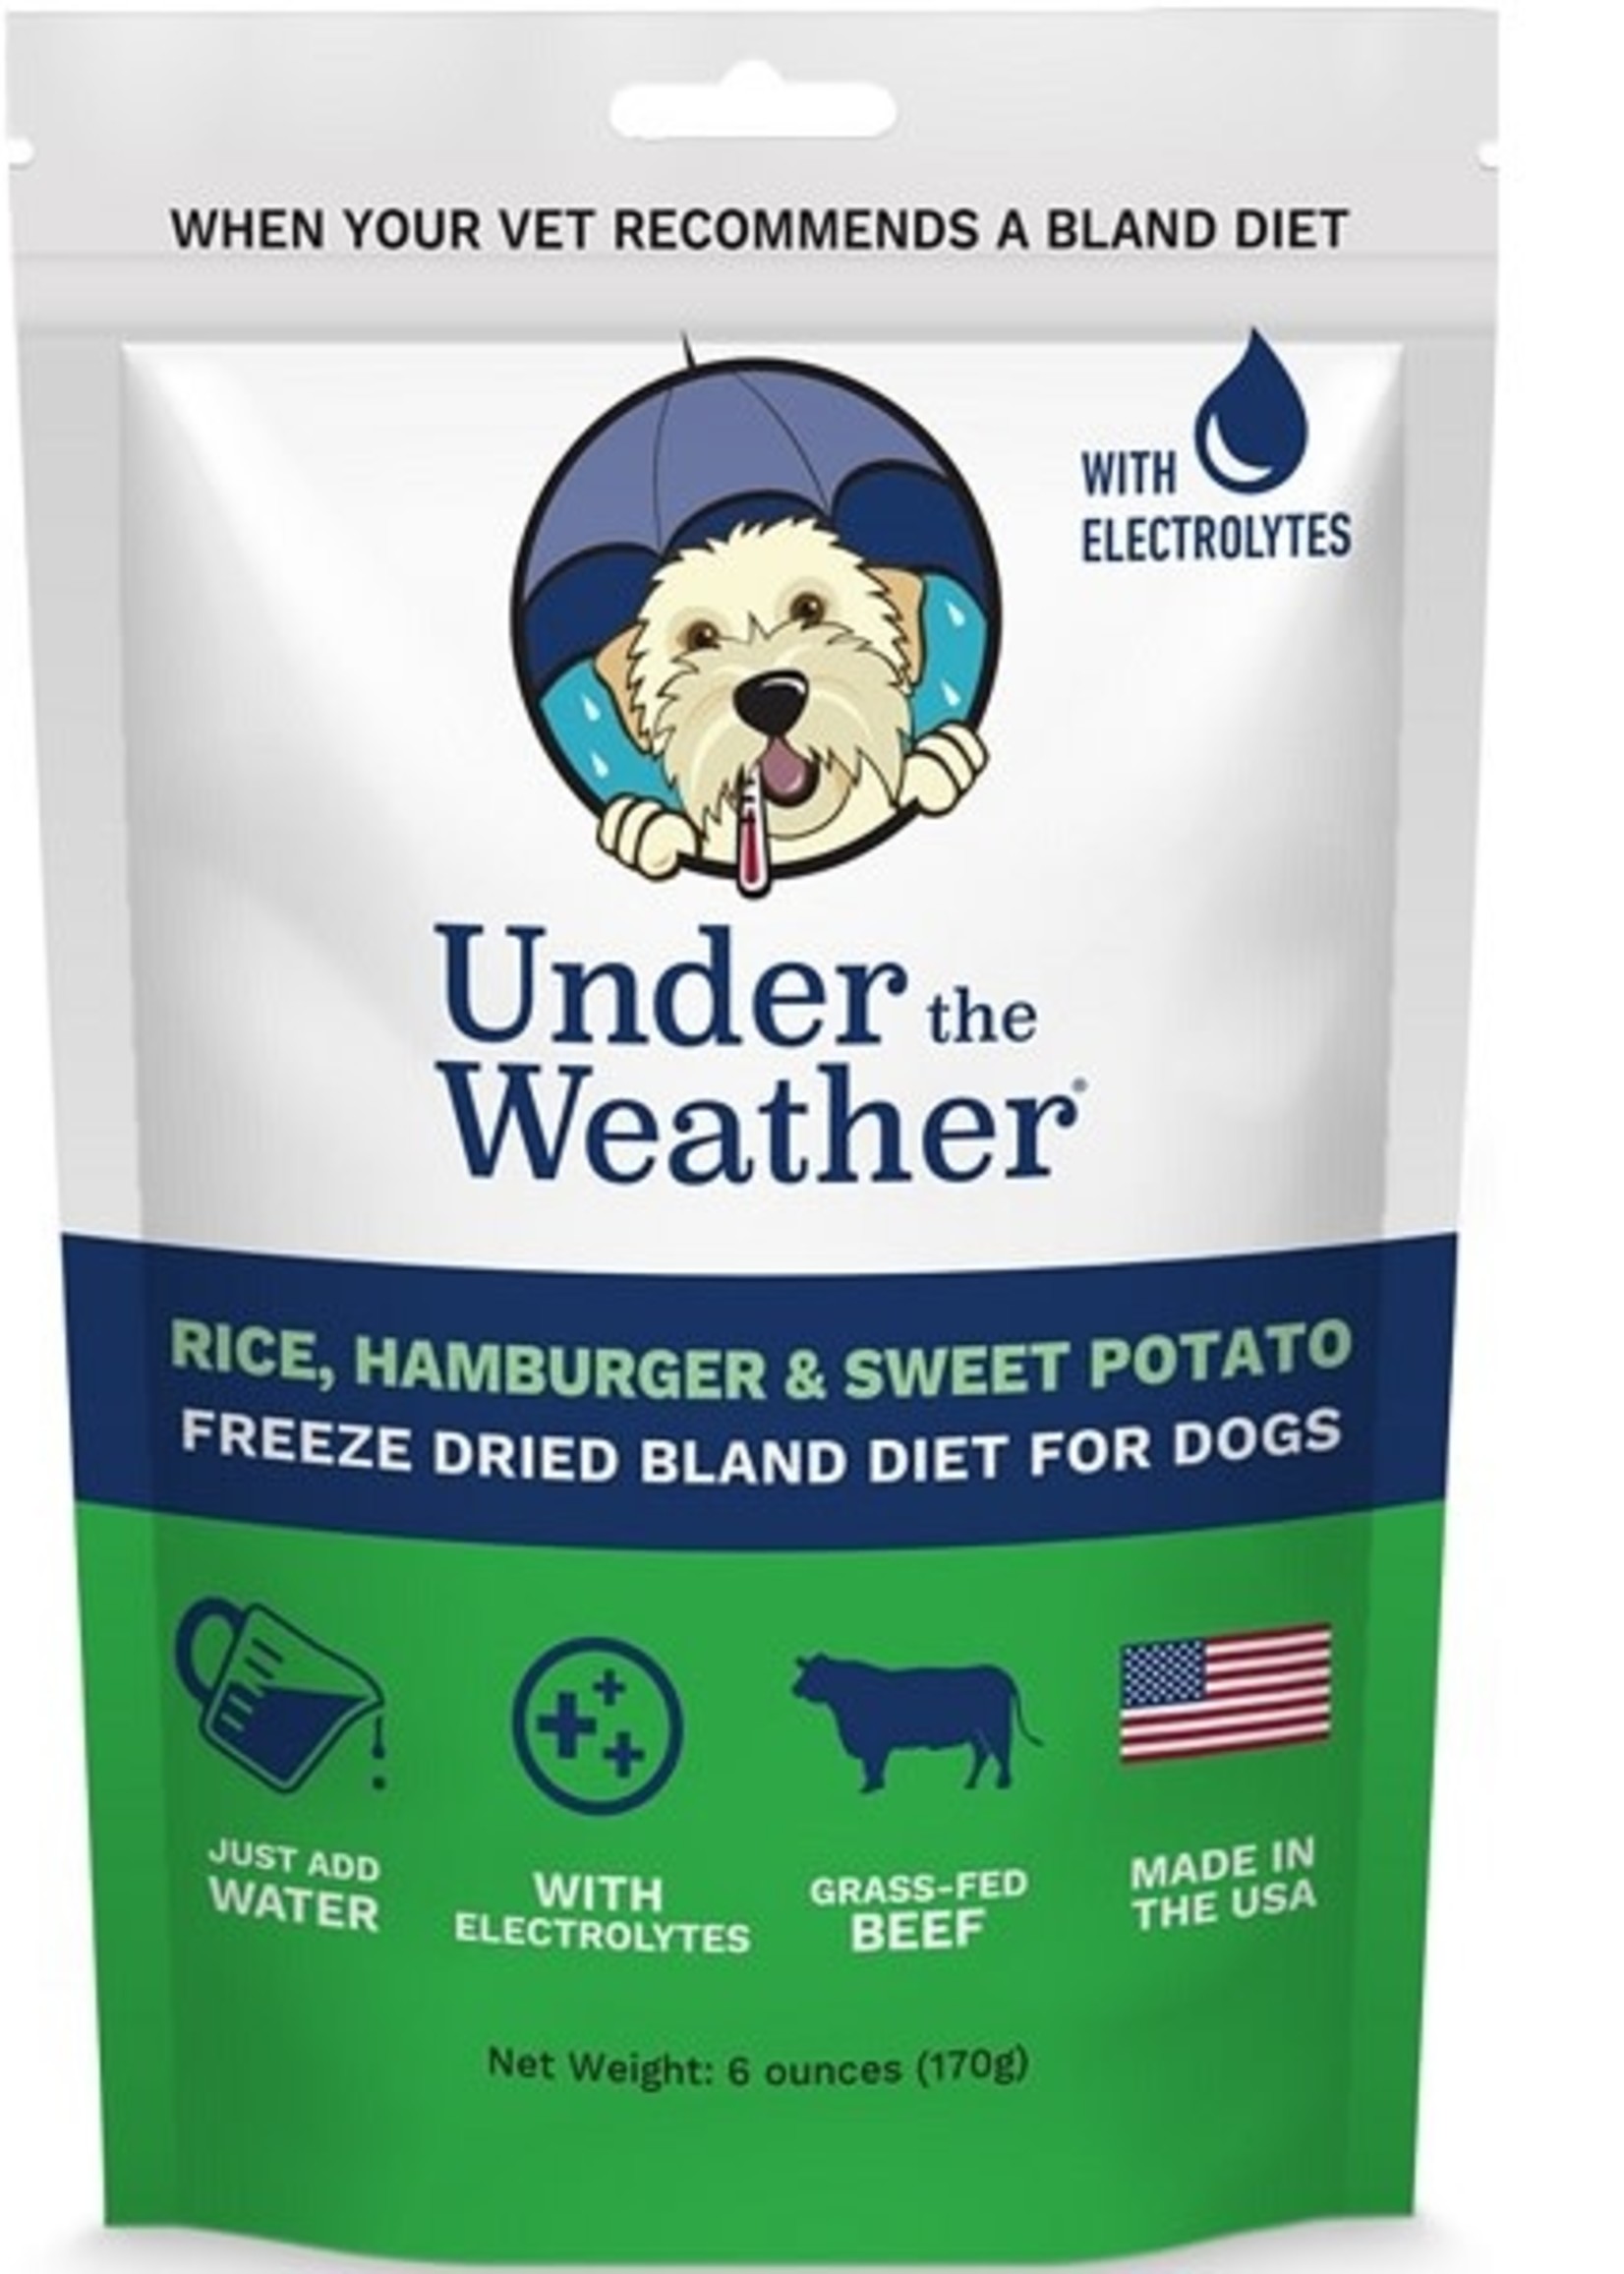 Under the Weather Bland Diets Hamburger, Rice, Swt Pot w/Electrolytes - 6oz